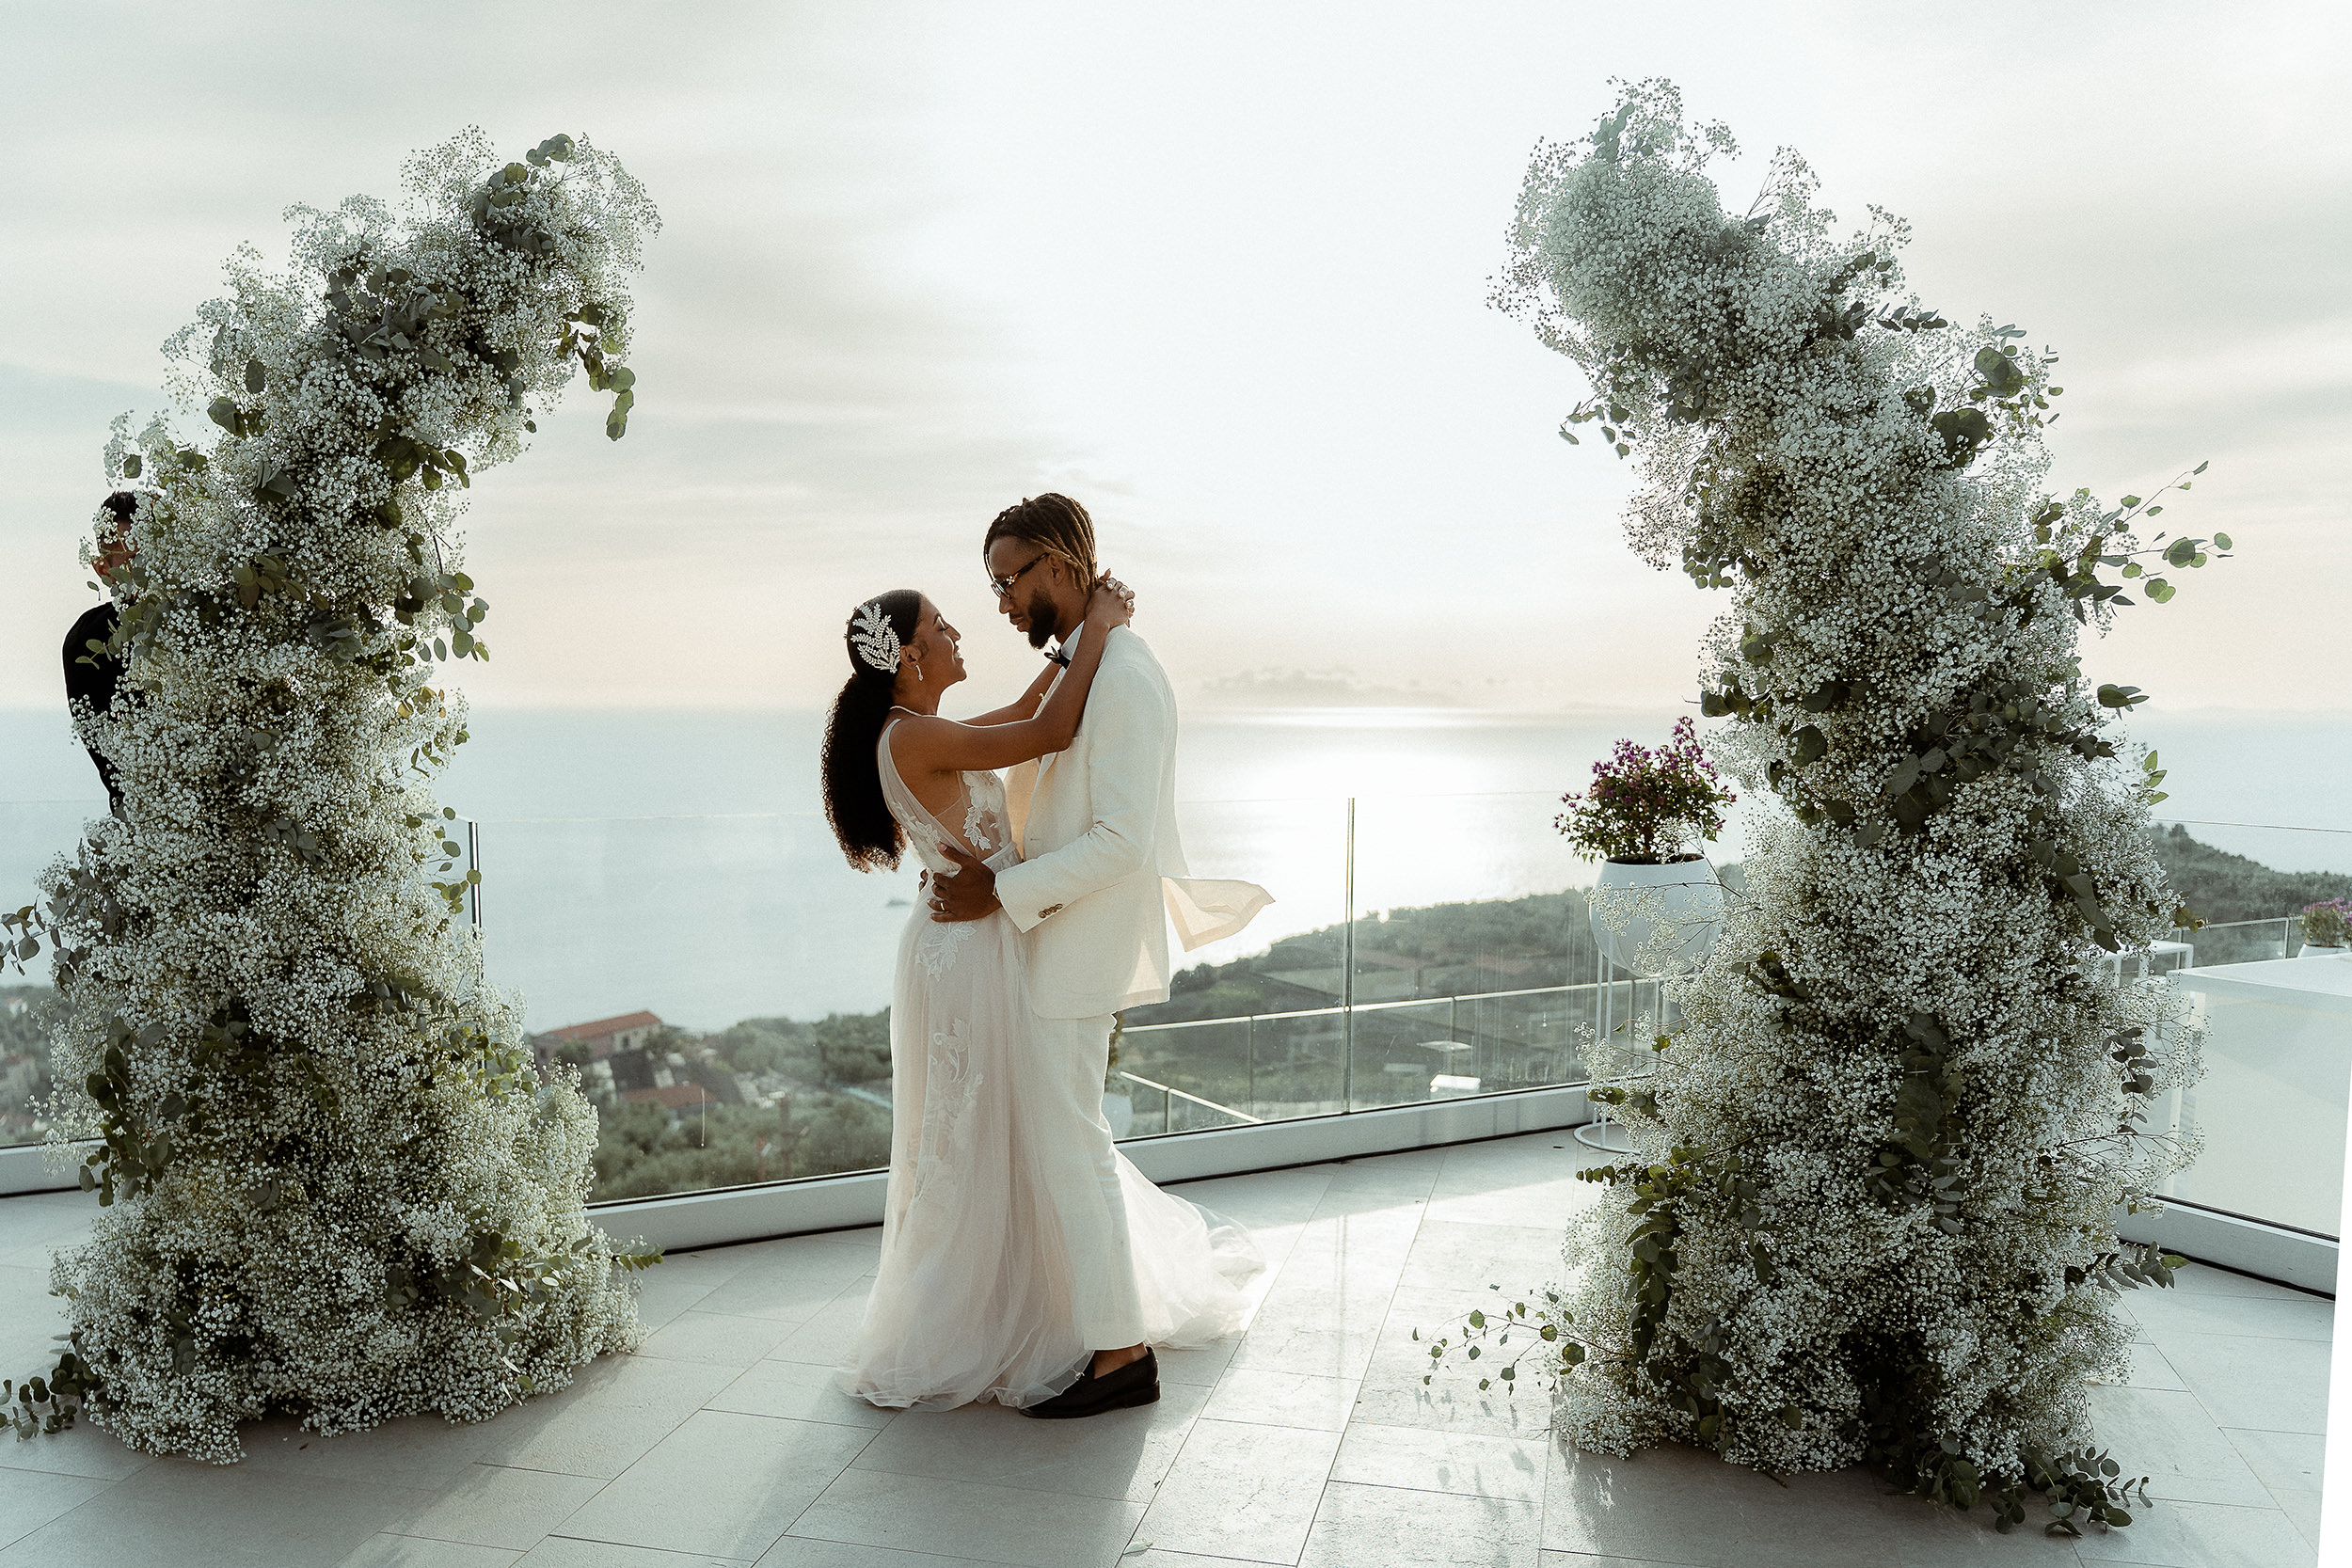 Couple hugging after their destination wedding ceremony in the Amalfi Coast Italy